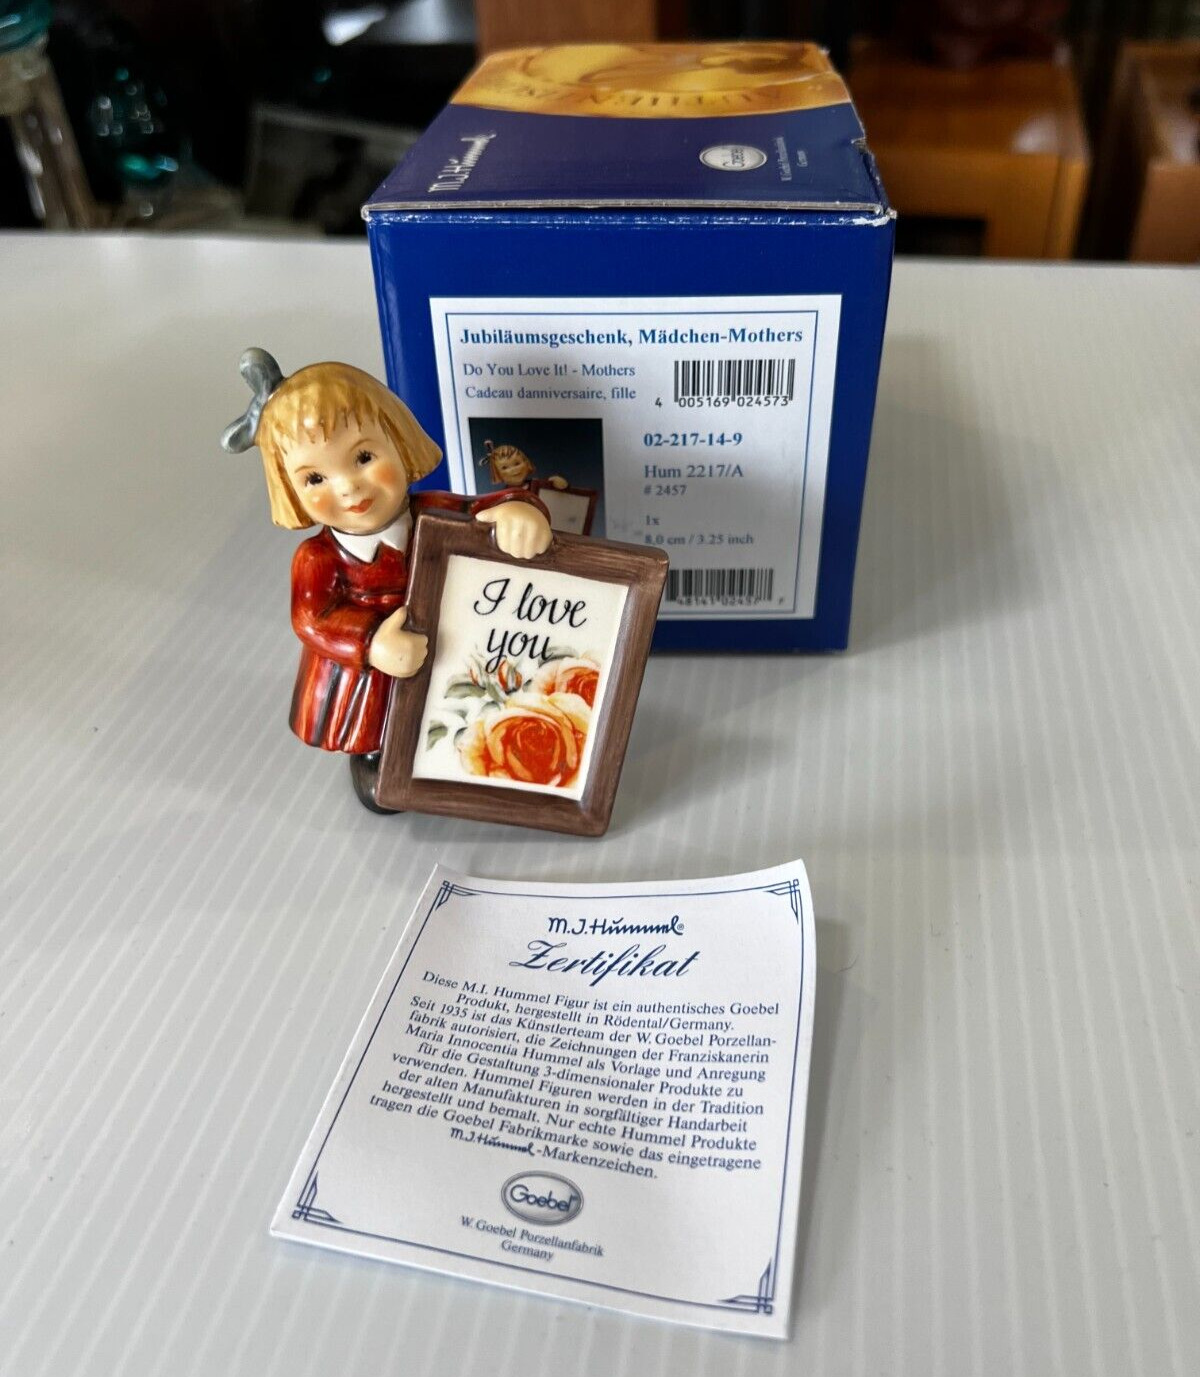 Hummel _ Do You Love It - Mother _ 3.25 Inch Figurine HUM 2217/A with Box TMK8